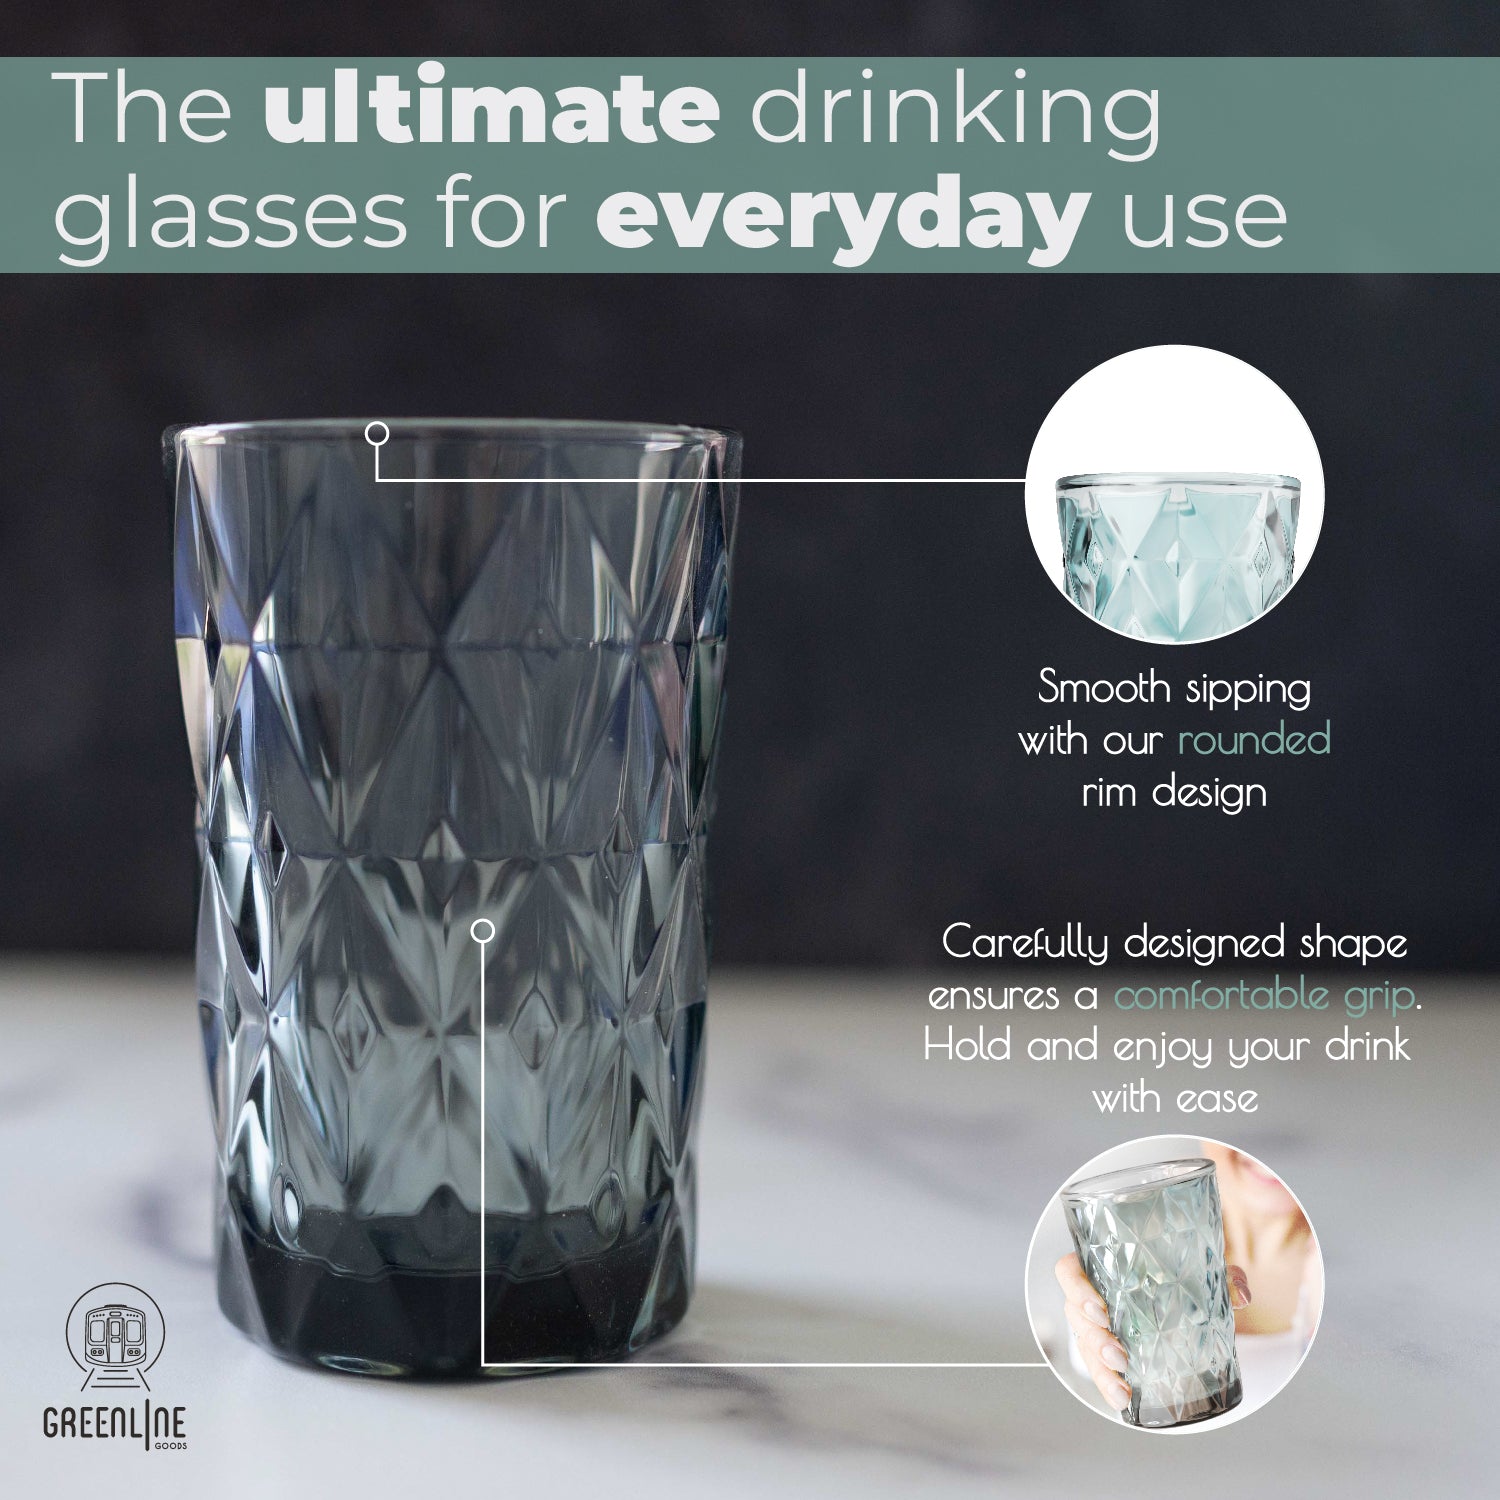 Your Glassware and Drink Just Got Engaged: Diamond Drinking Glasses